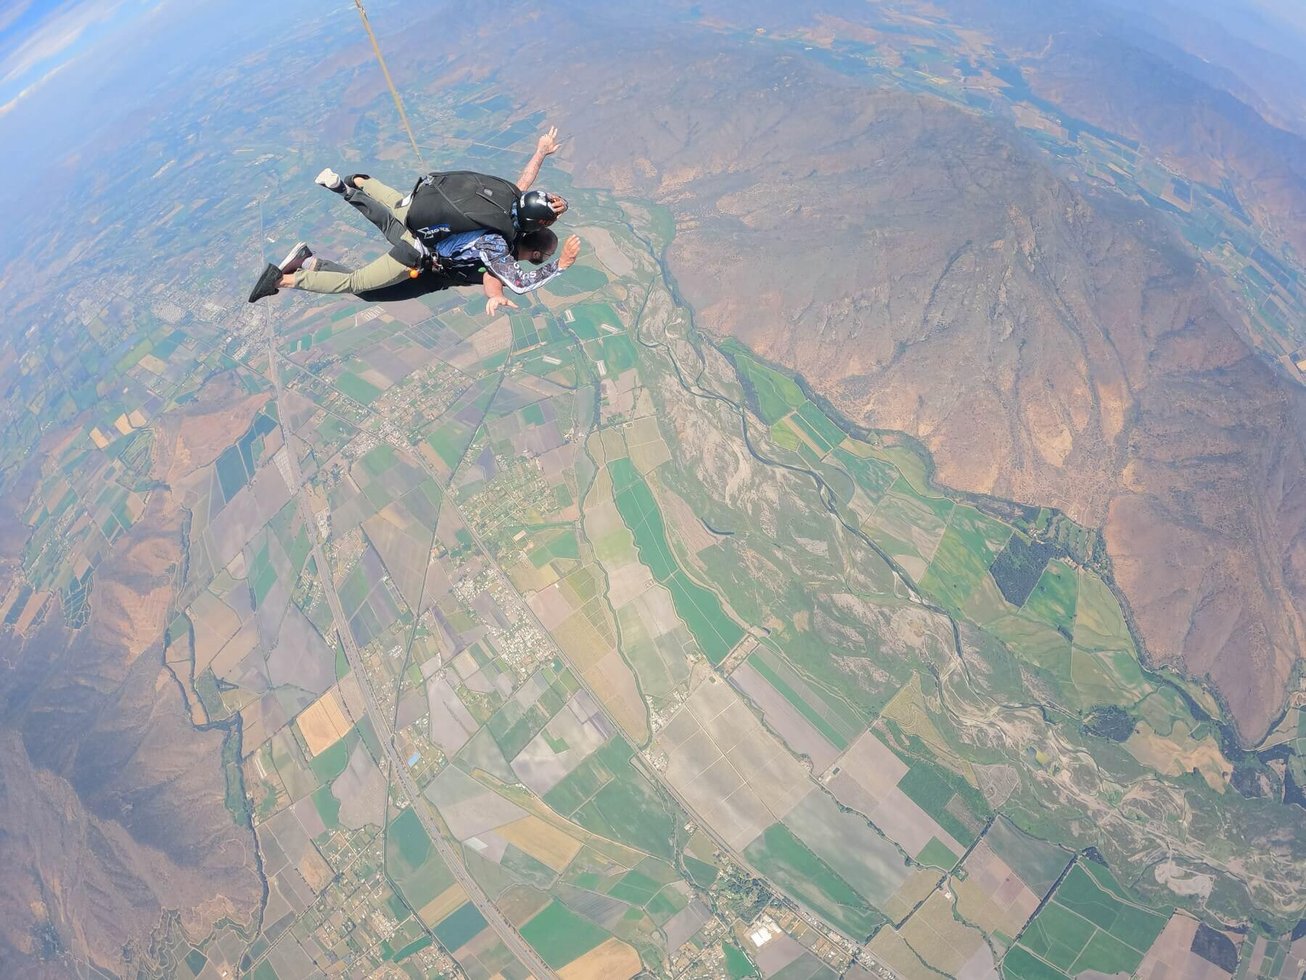 Catriel Guillén on Skydiving in Chile image